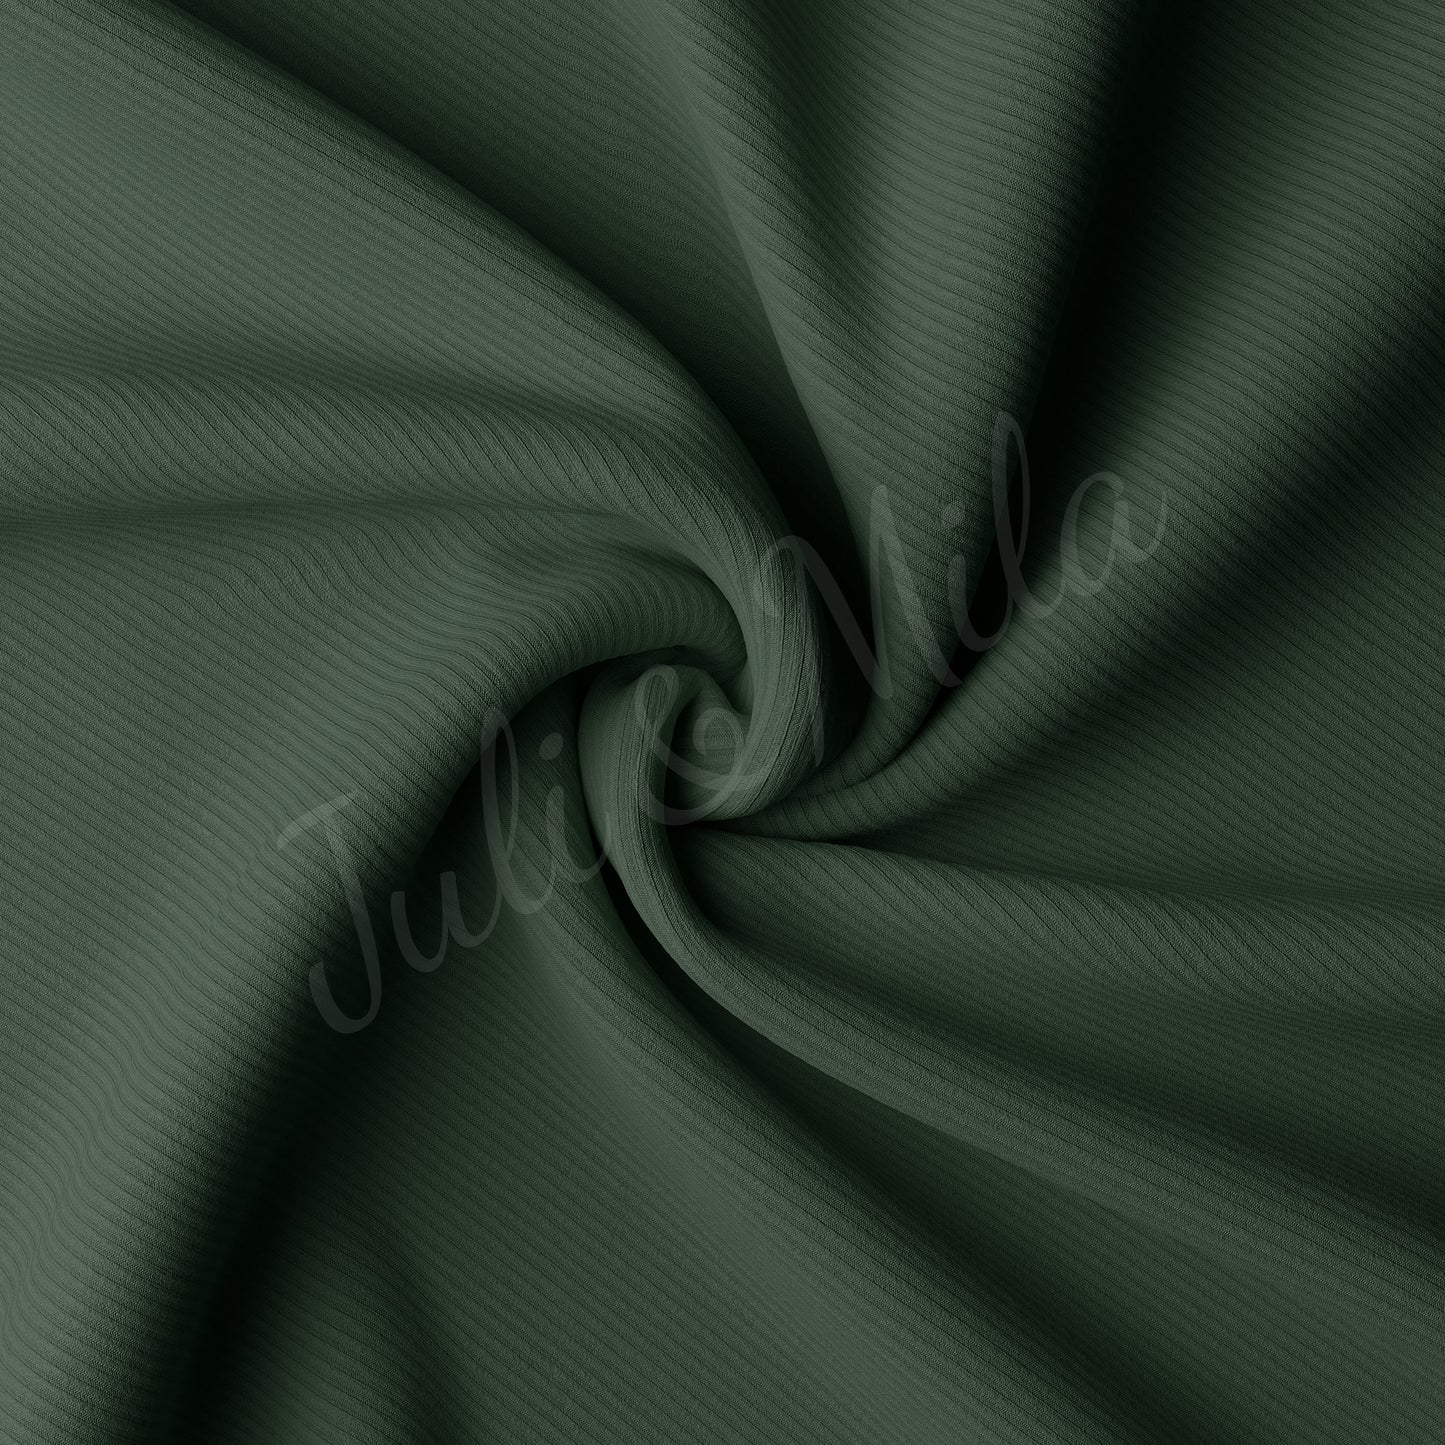 Army green  Rib Knit Fabric by the Yard Ribbed Jersey Stretchy Soft Polyester Stretch Fabric 1 Yard